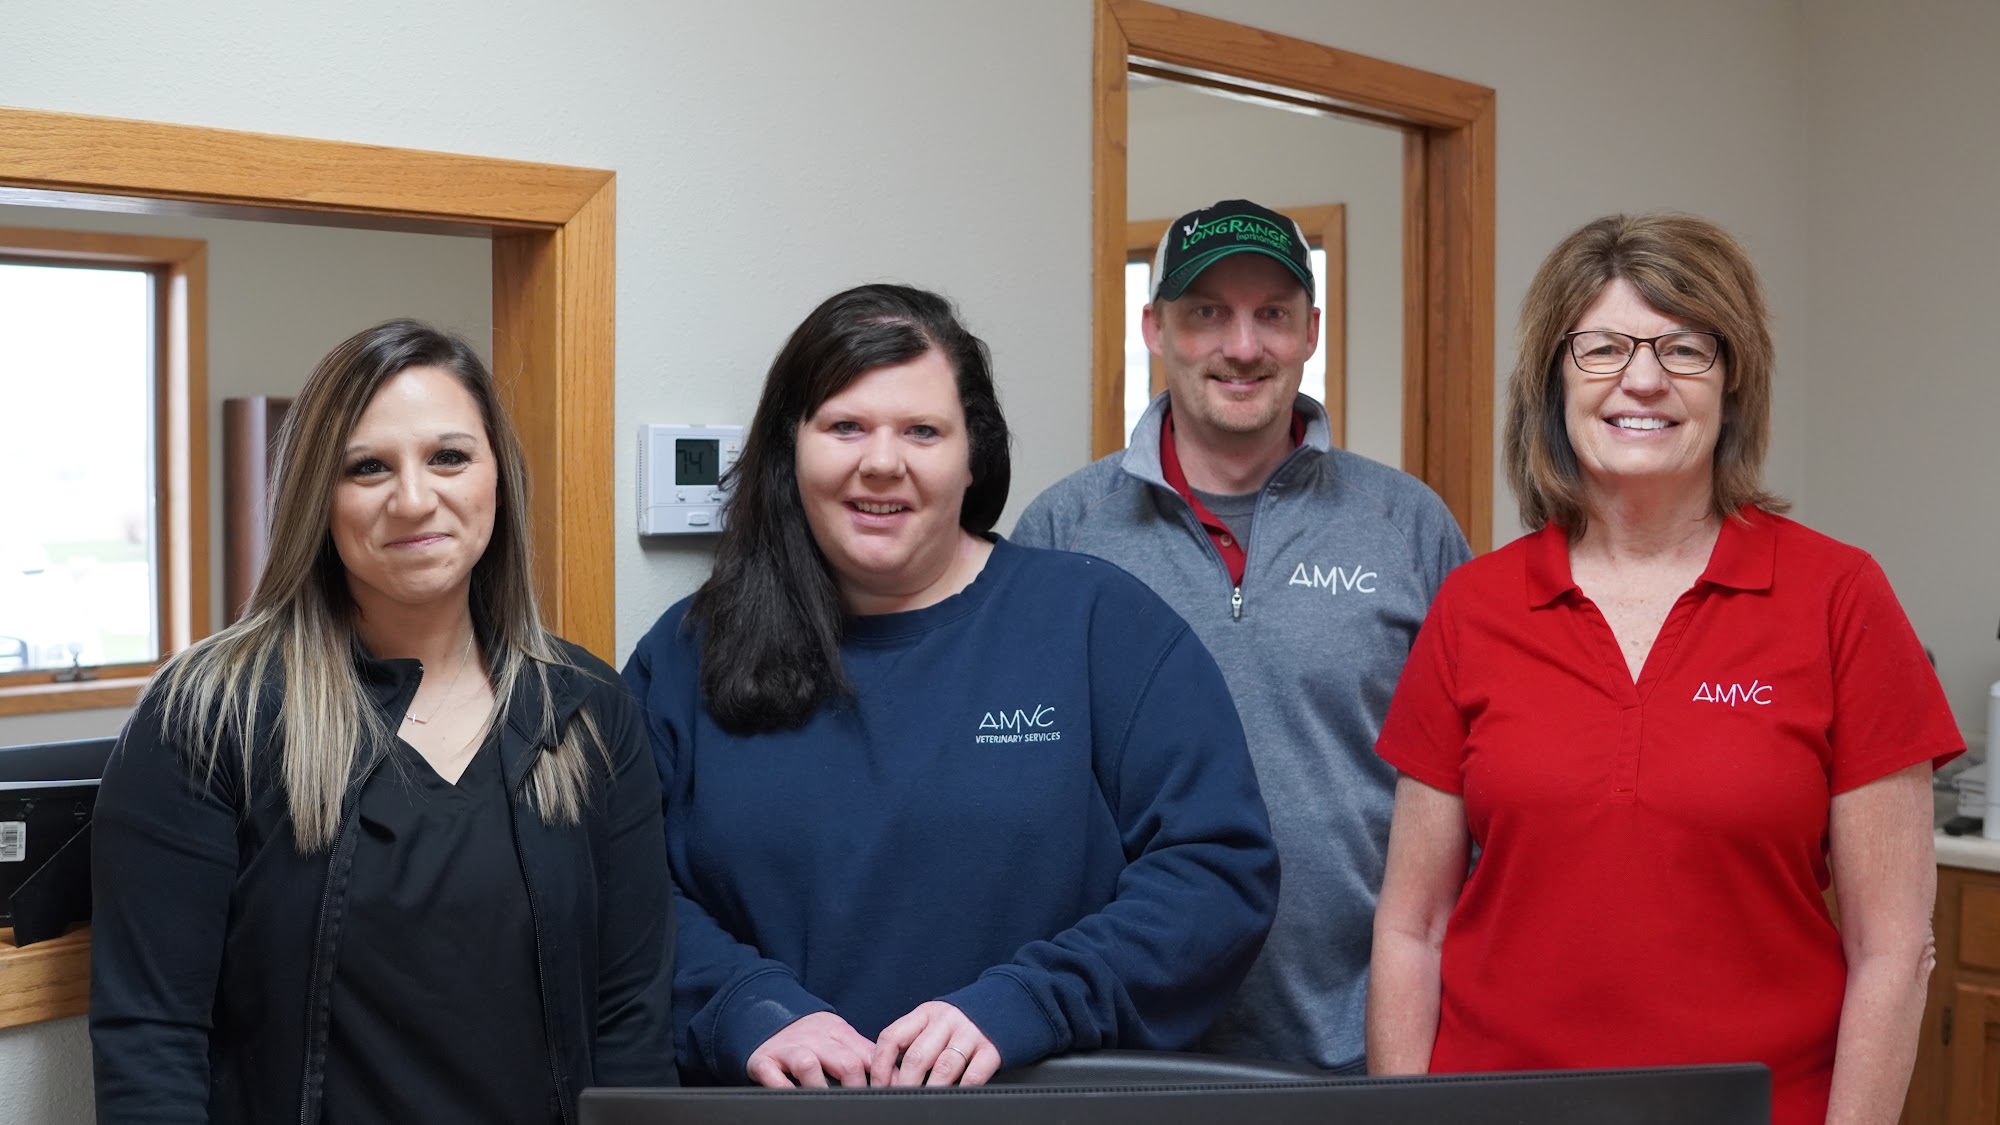 AMVC Veterinary Services 401 Rye Ave, Templeton Iowa 51463